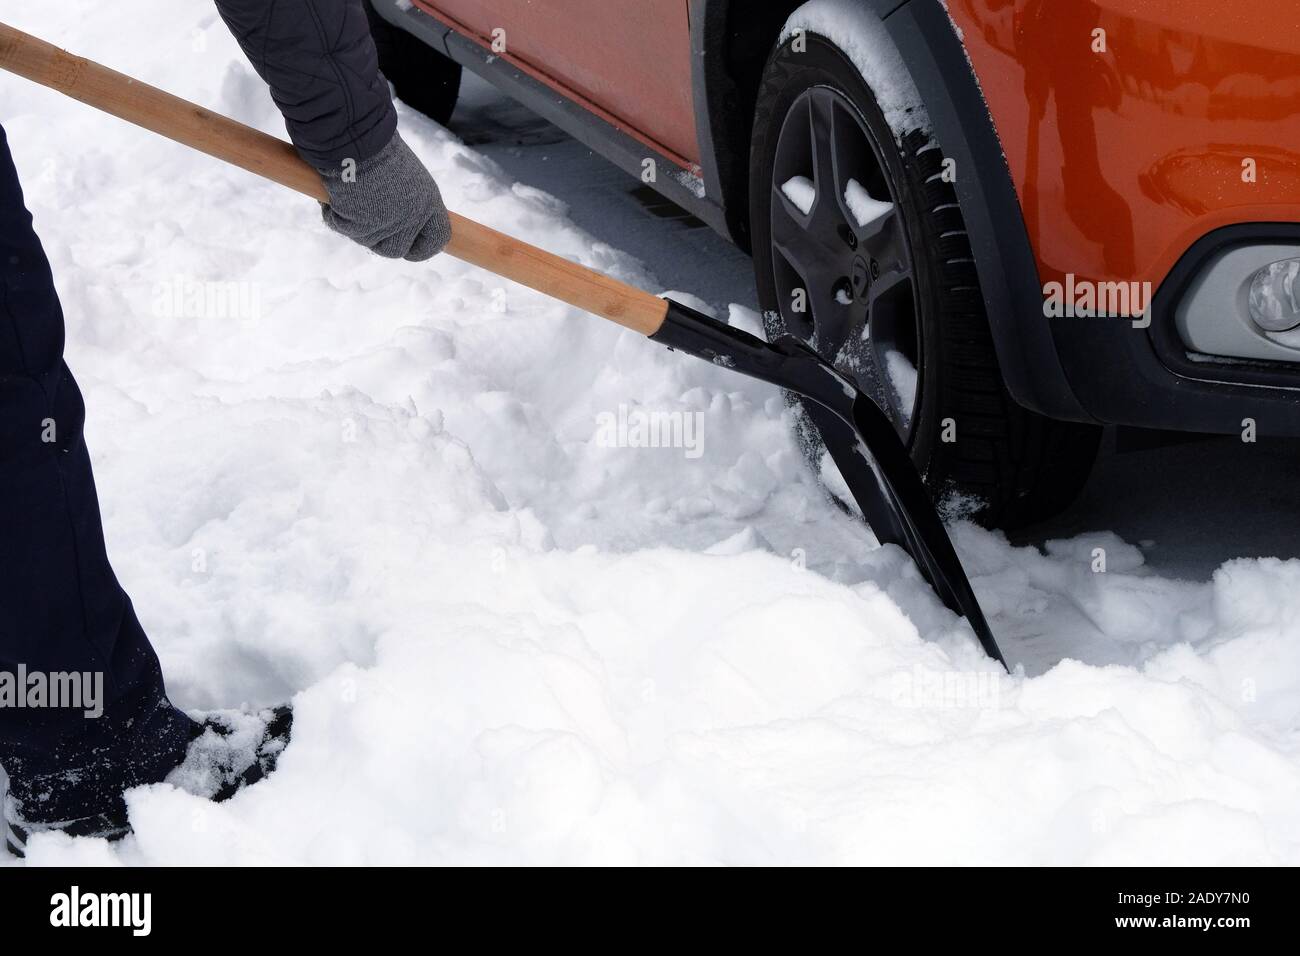 Man with shovel is brushing snow around car after snow storm. Shovel in hand. Winter problems of car drivers. Stock Photo